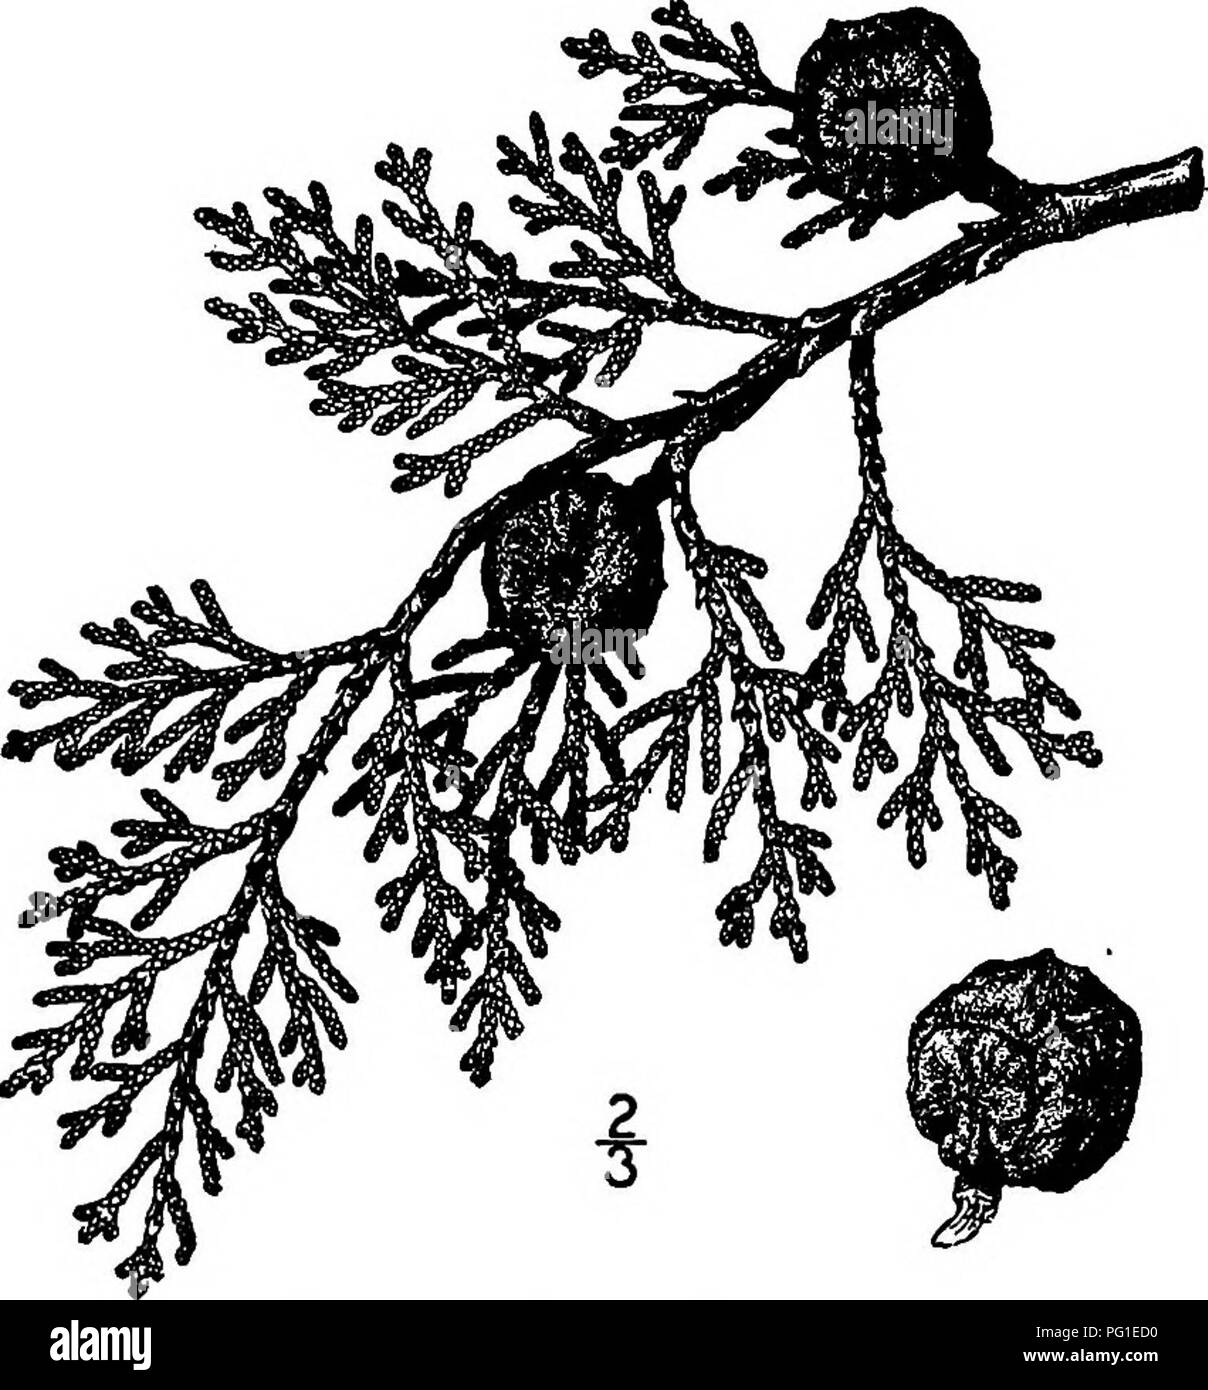 . North American trees : being descriptions and illustrations of the trees growing independently of cultivation in North America, north of Mexico and the West Indies . Trees. Gowen Cypress 99 2. GOWEN CYPRESS — Cupressus Goveniana Gordon This handsome tree occurs sparingly in western California from Mendocino county southward to San Diego county, often reaching an altitude of 900 meters in mountain canons. It is very variable, from a vigorous tree 15 meters high, with a trunk diameter of 6 dm., to a small shrub. It is also called Mountain cypress and North coast cypress. The trunk is short and Stock Photo